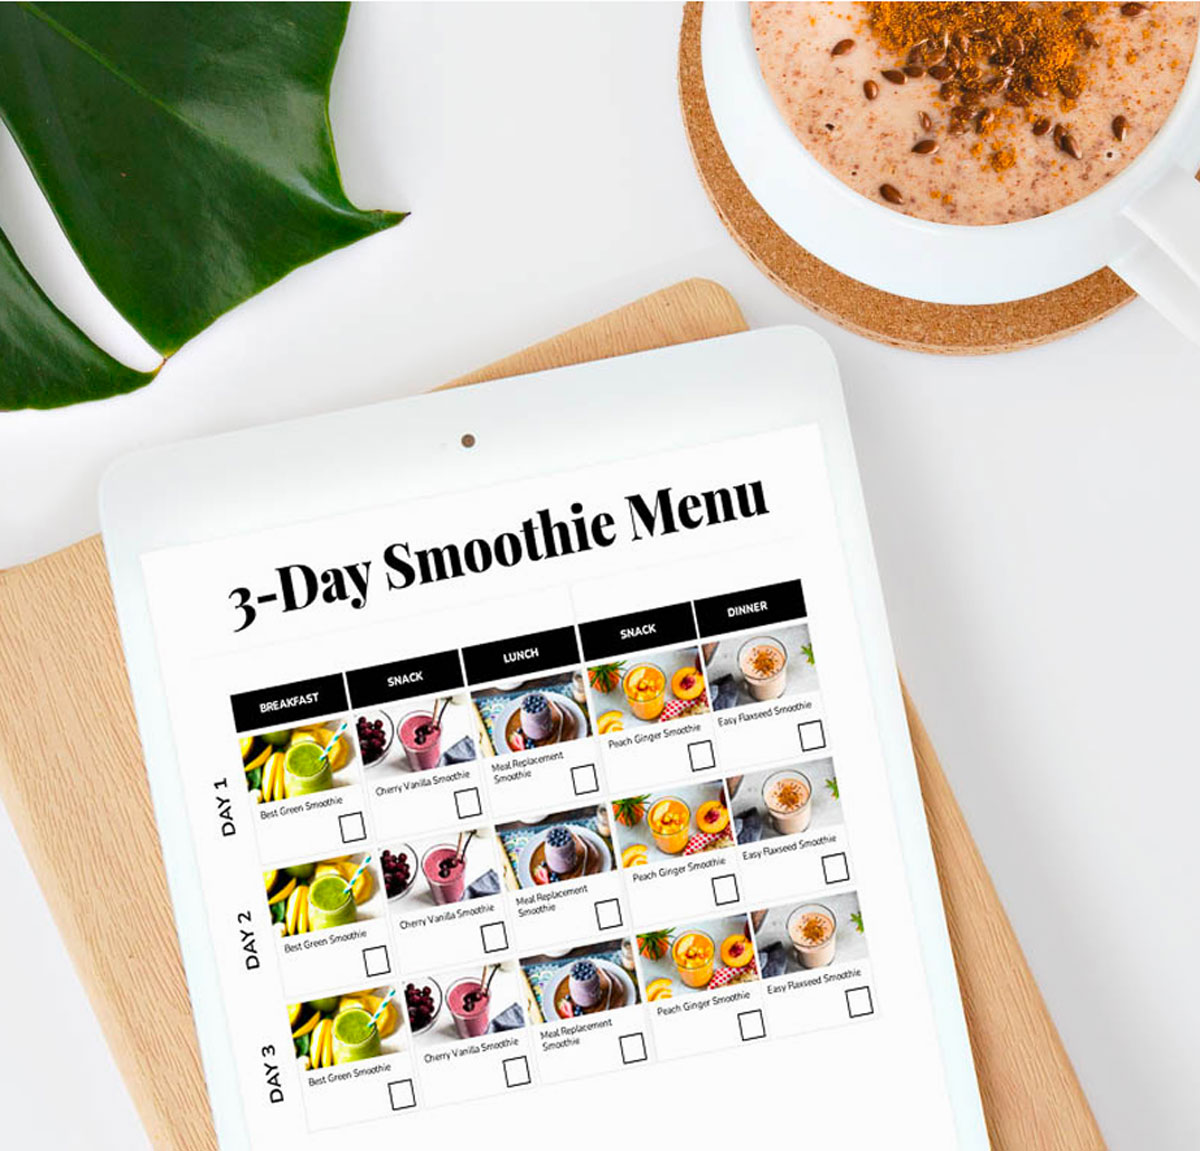 white tablet with 3-Day Smoothie menu written on top then 3 day smoothie diet plan laid out.